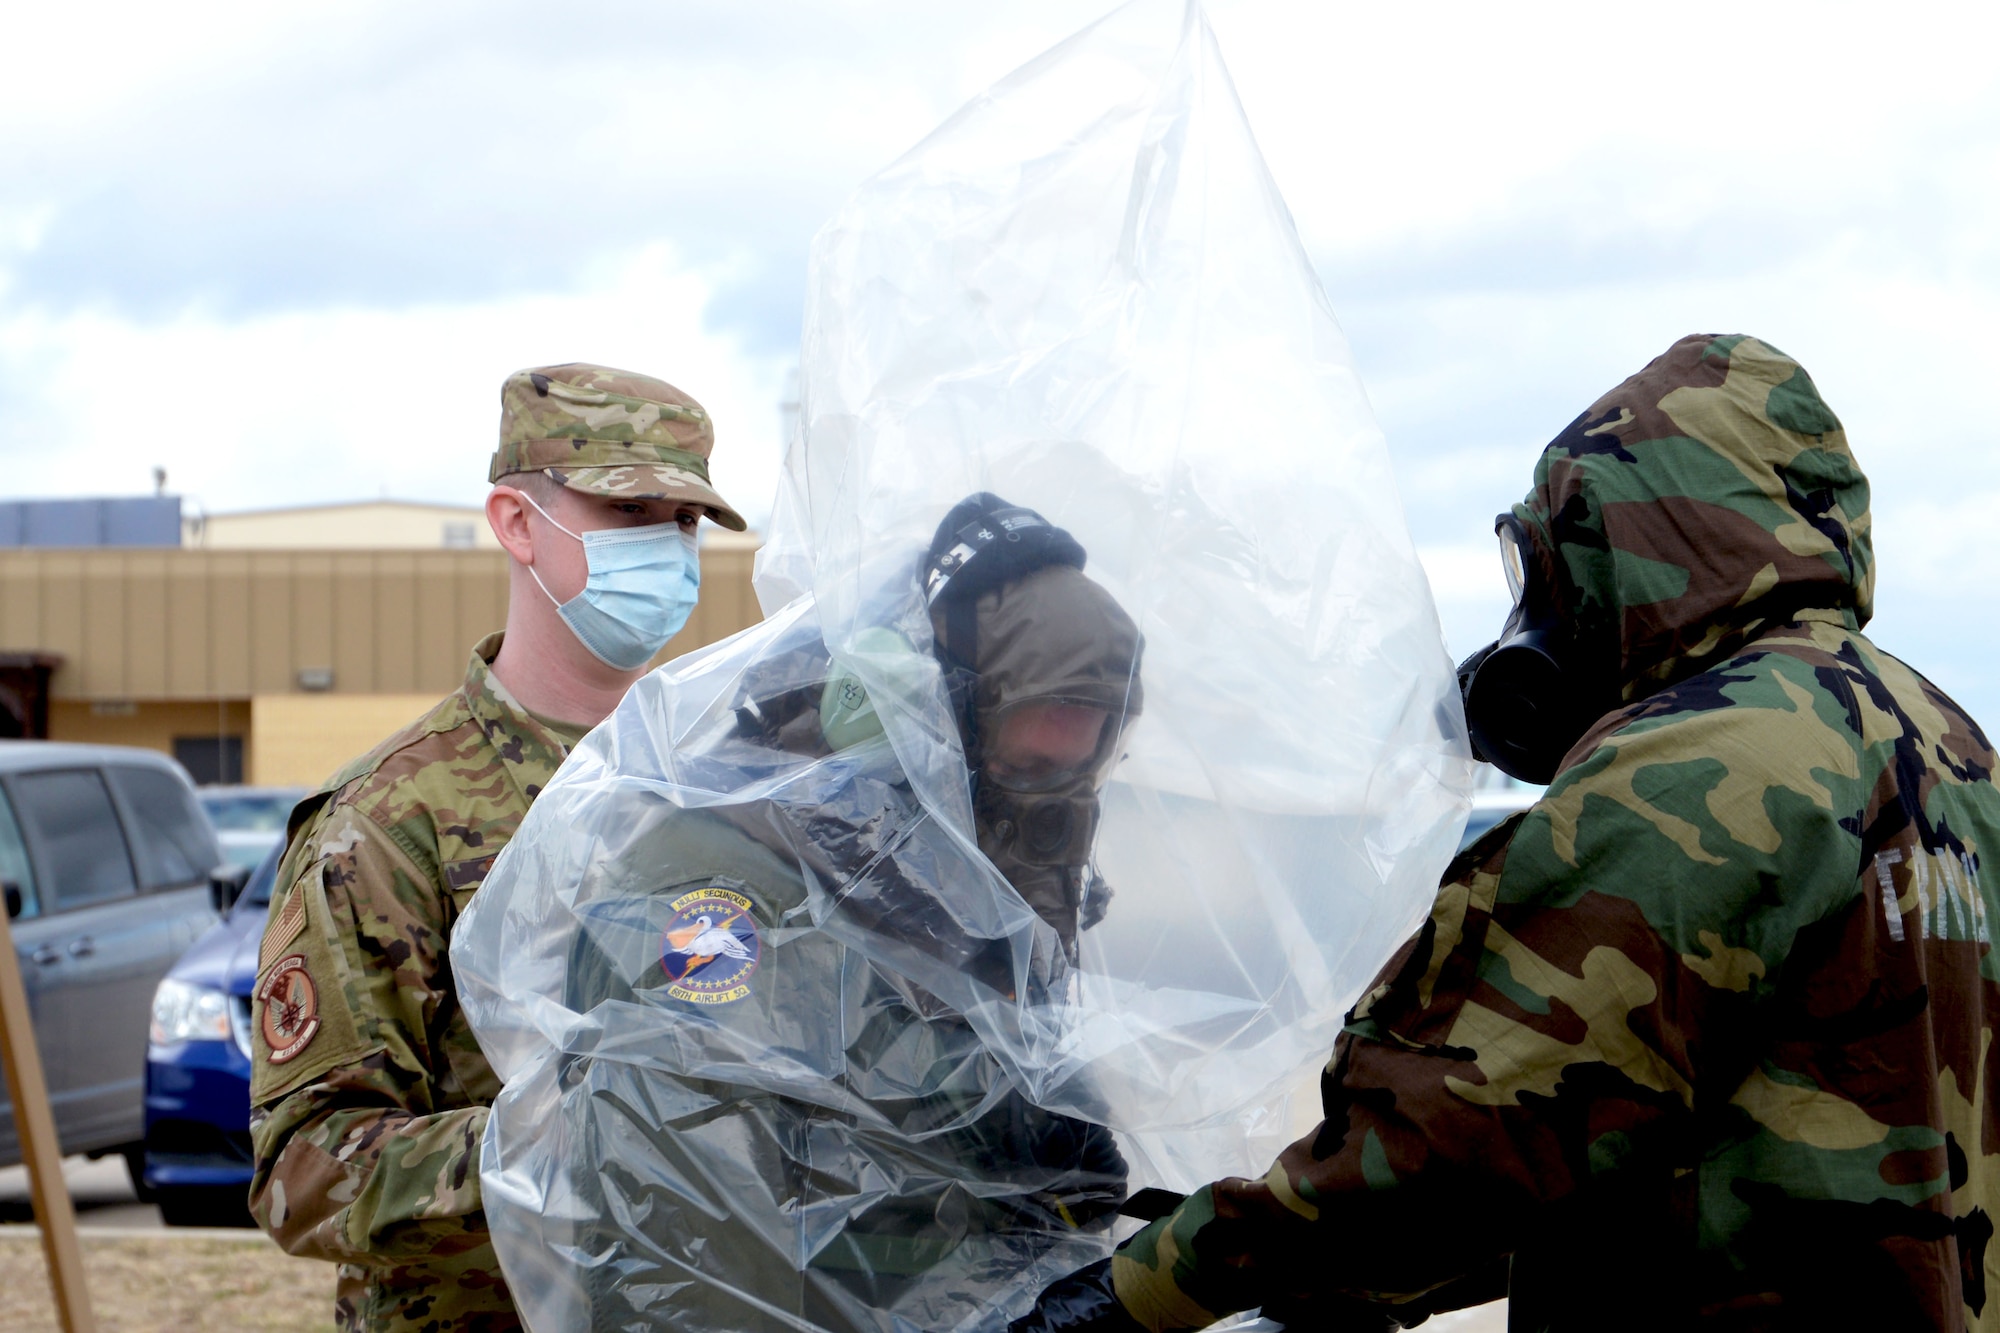 Tech. Sgt. Eric Oestreich, 68th Airlift Squadron loadmaster, wears a plastic cover while being processed for decontamination Nov. 8, 2020, at Joint Base San Antonio-Lackland, Texas. Oestreich, along with other 68th AS and 433rd Operations Support Squadron Airmen, practiced decontamination procedures in order to maintain readiness. (U.S. Air Force photo by Tech. Sgt. Samantha Mathison)